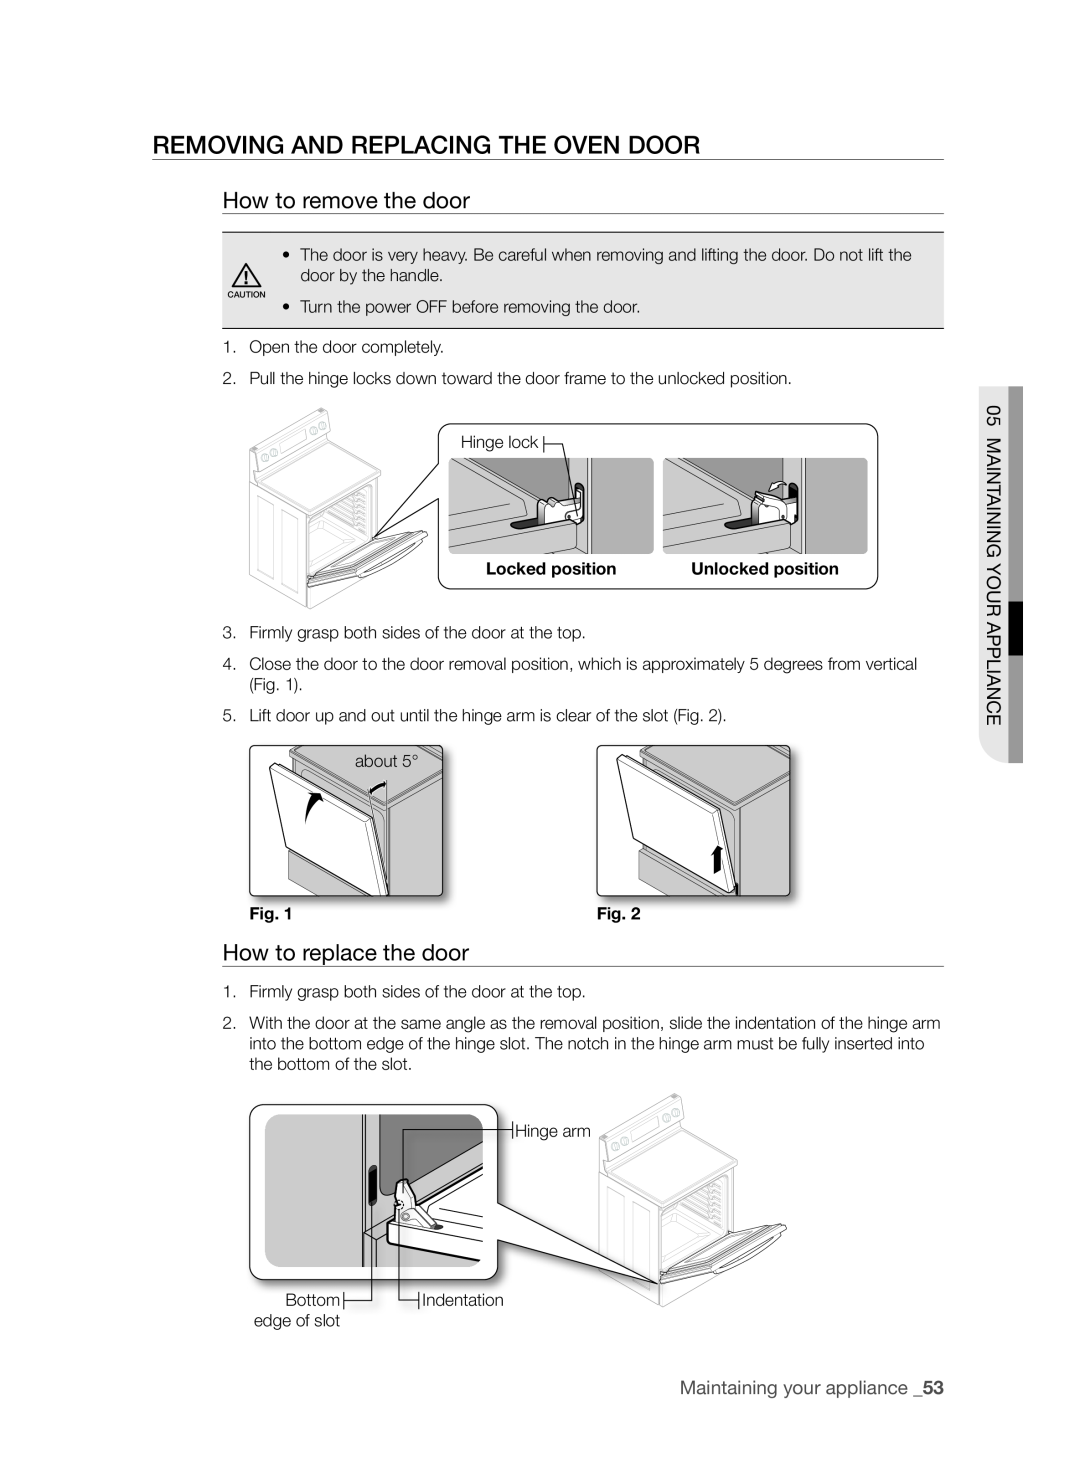 Samsung FE-R500WW user manual Removing and replacing the oven door, How to remove the door, How to replace the door 